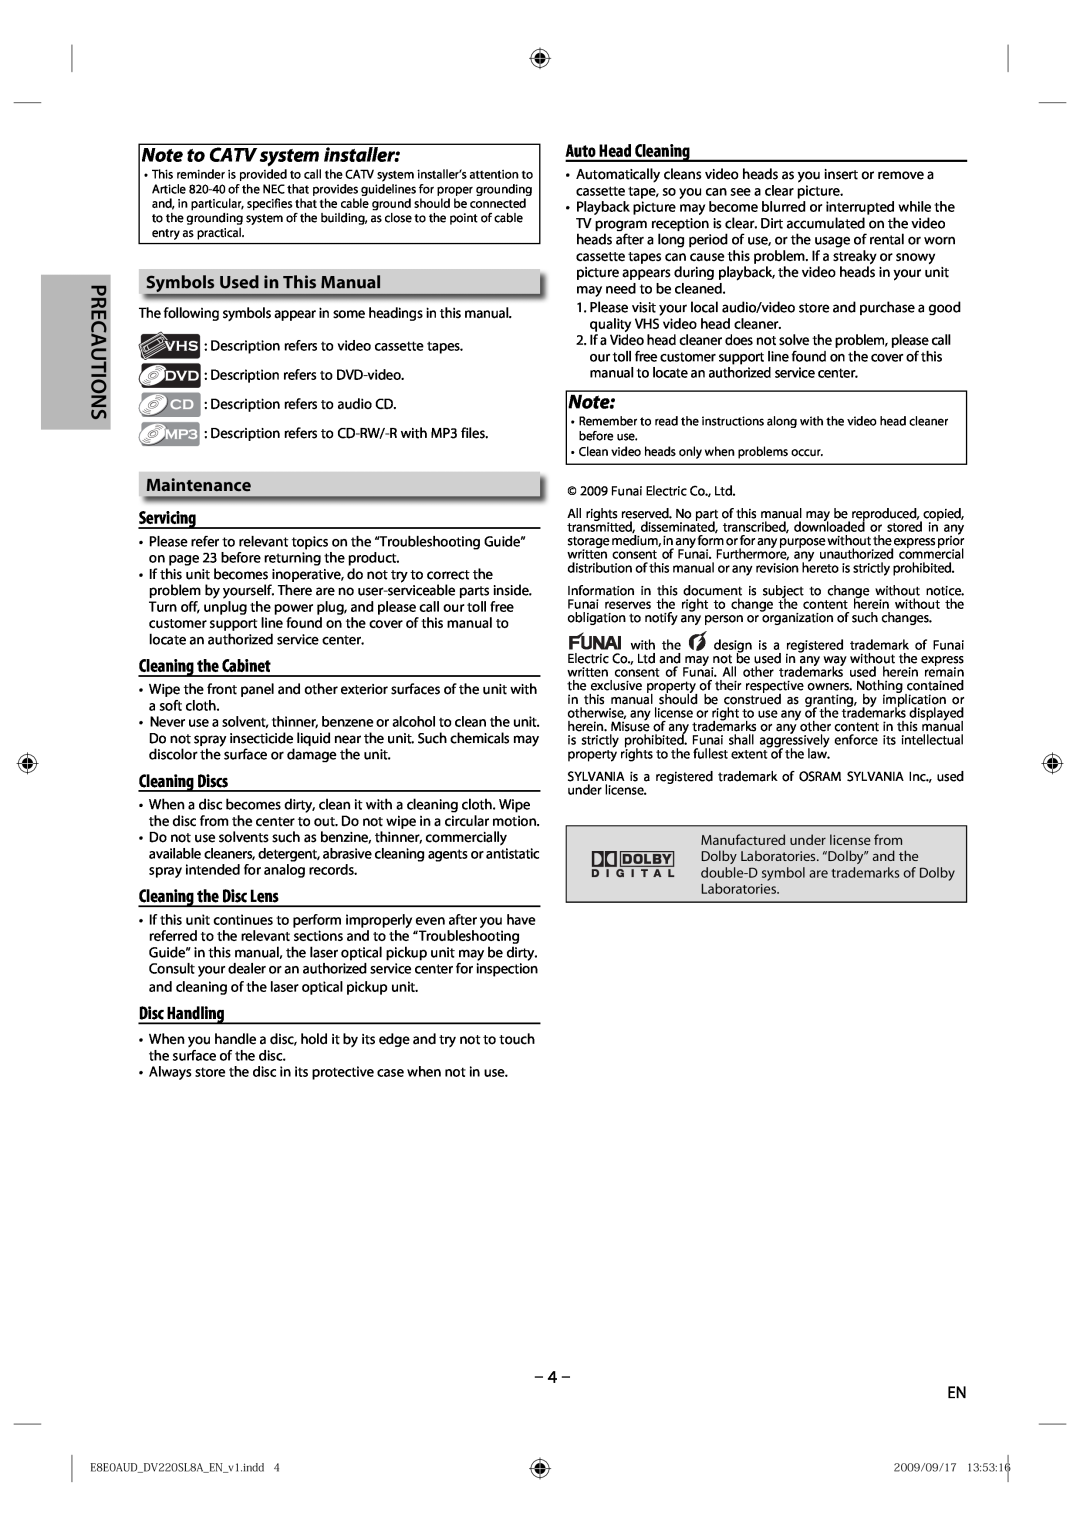 Sylvania DV220SL8 A Note to CATV system installer, Symbols Used in This Manual, Maintenance Servicing, Cleaning Discs 